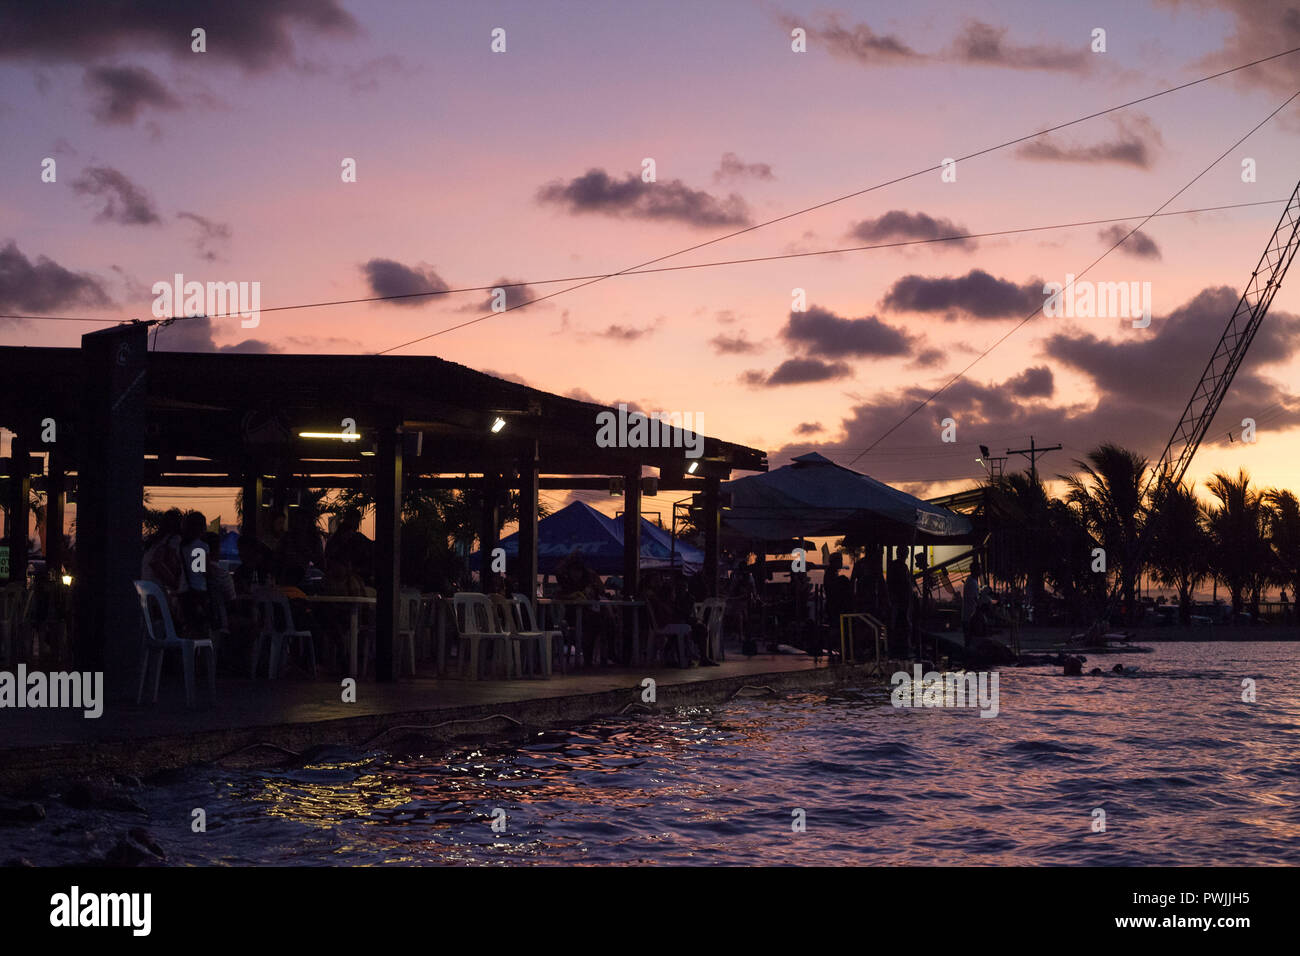 Sunset at Camsur Watersports Complex CWC, Naga City. Stock Photo